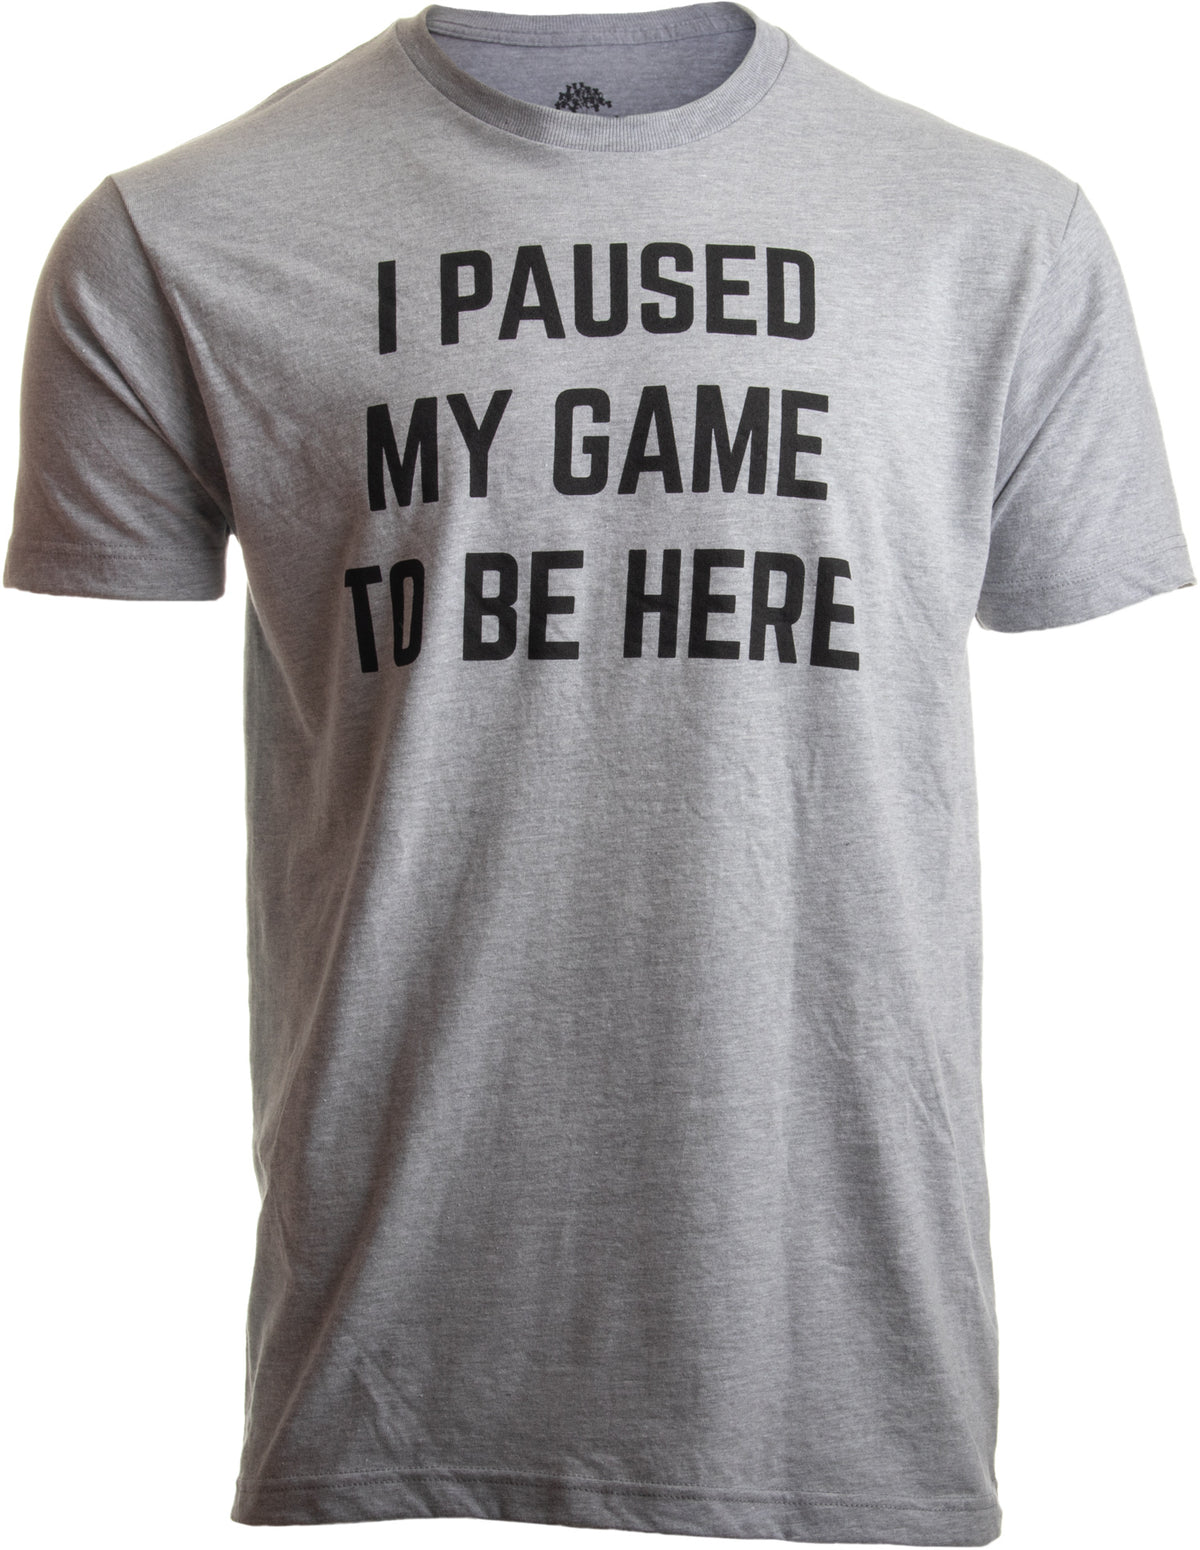 I Paused my Game to Be Here | Funny Video Gamer Gaming Player Humor Joke for Men Women T-shirt